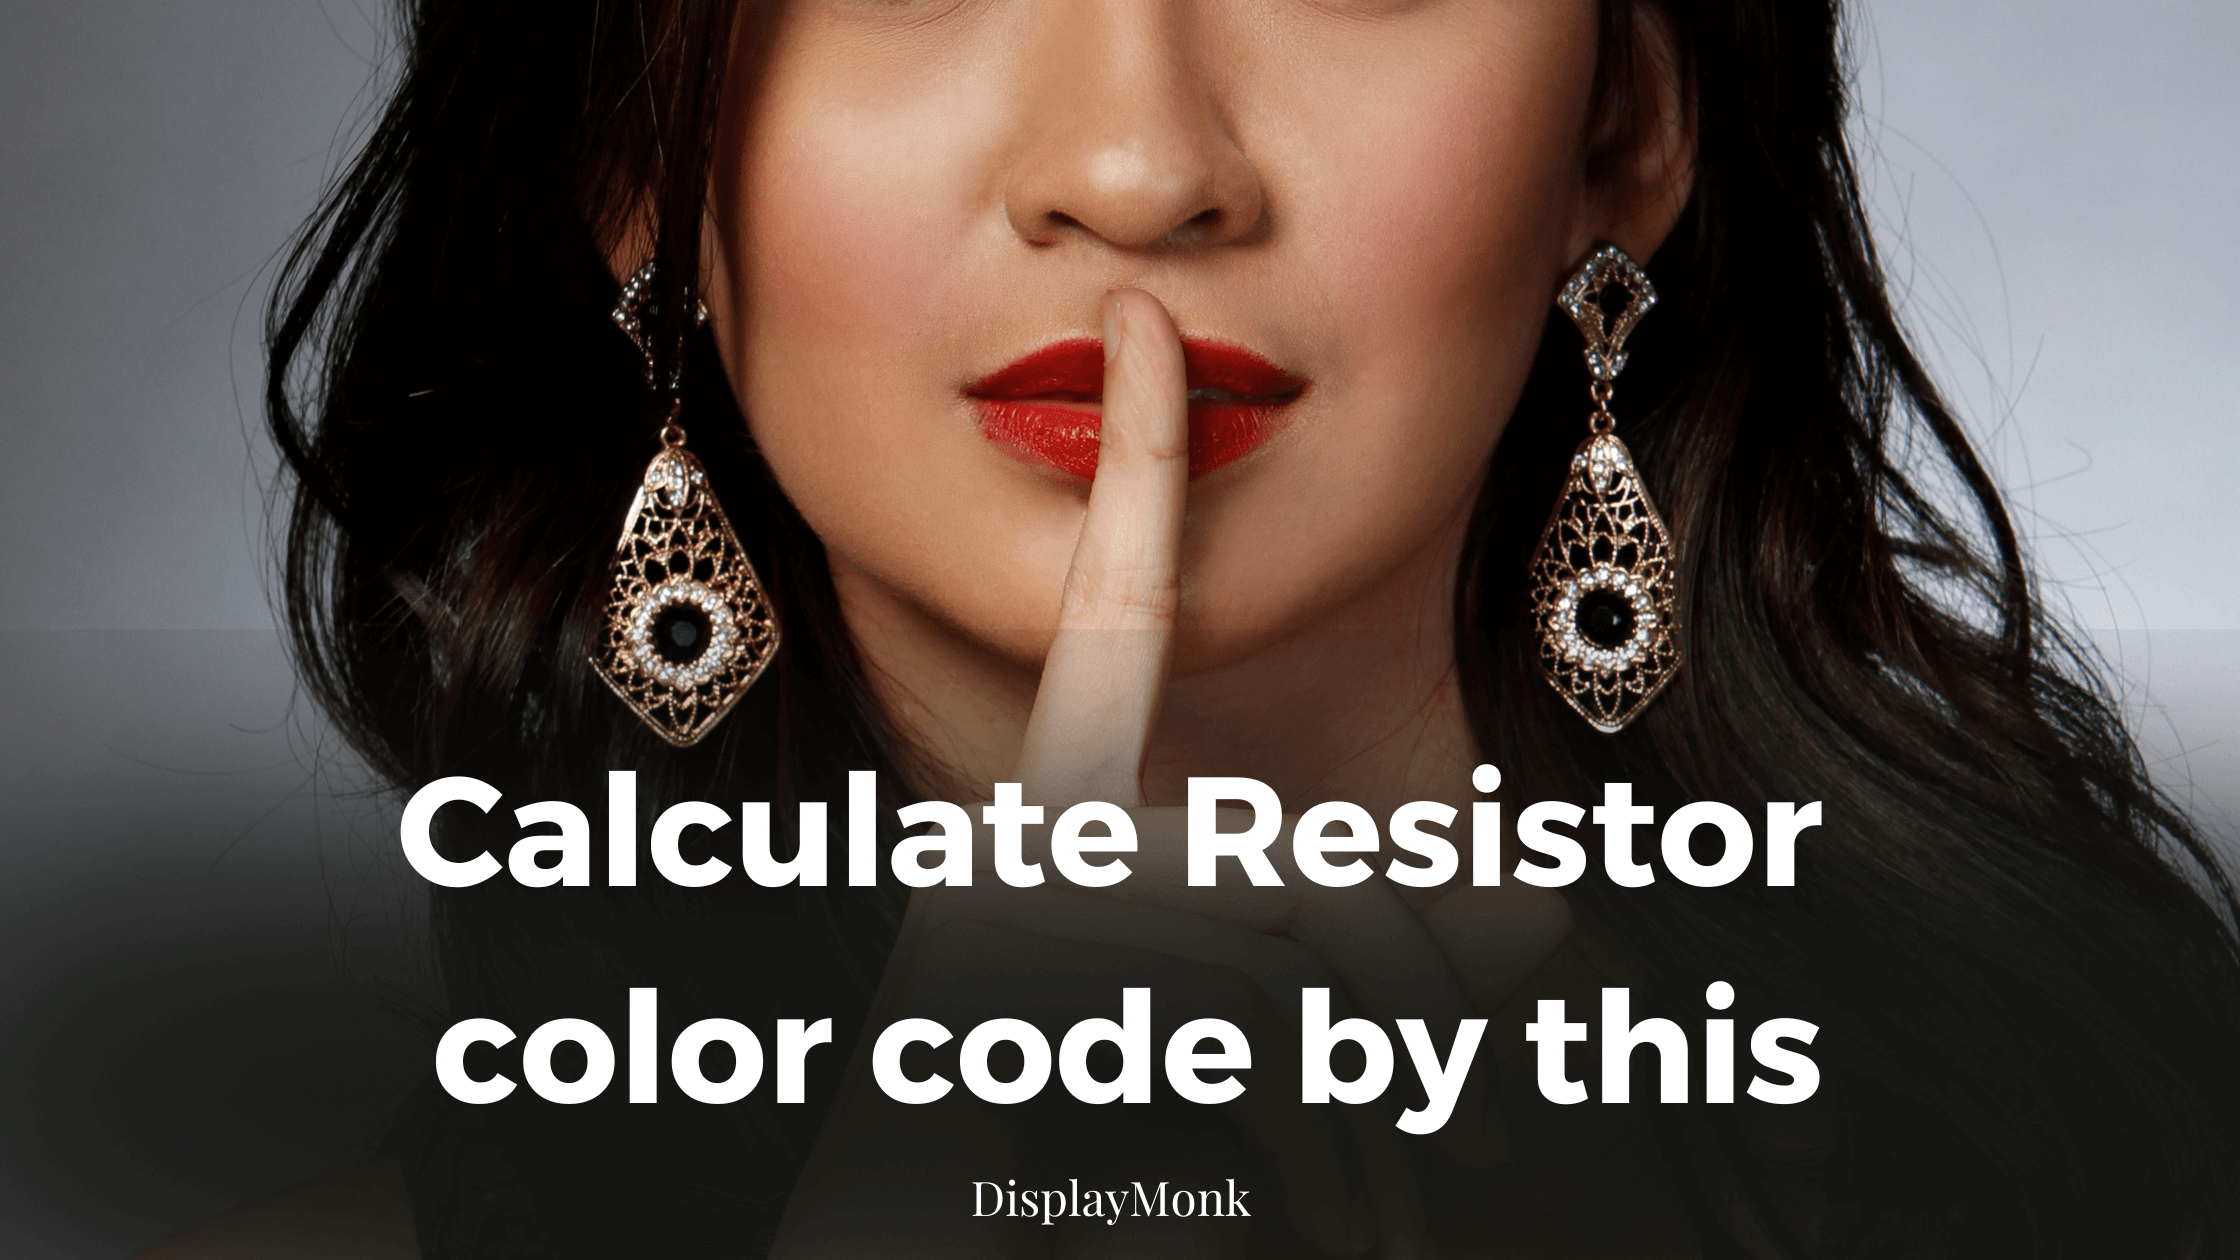 Calculate resistor color code by this